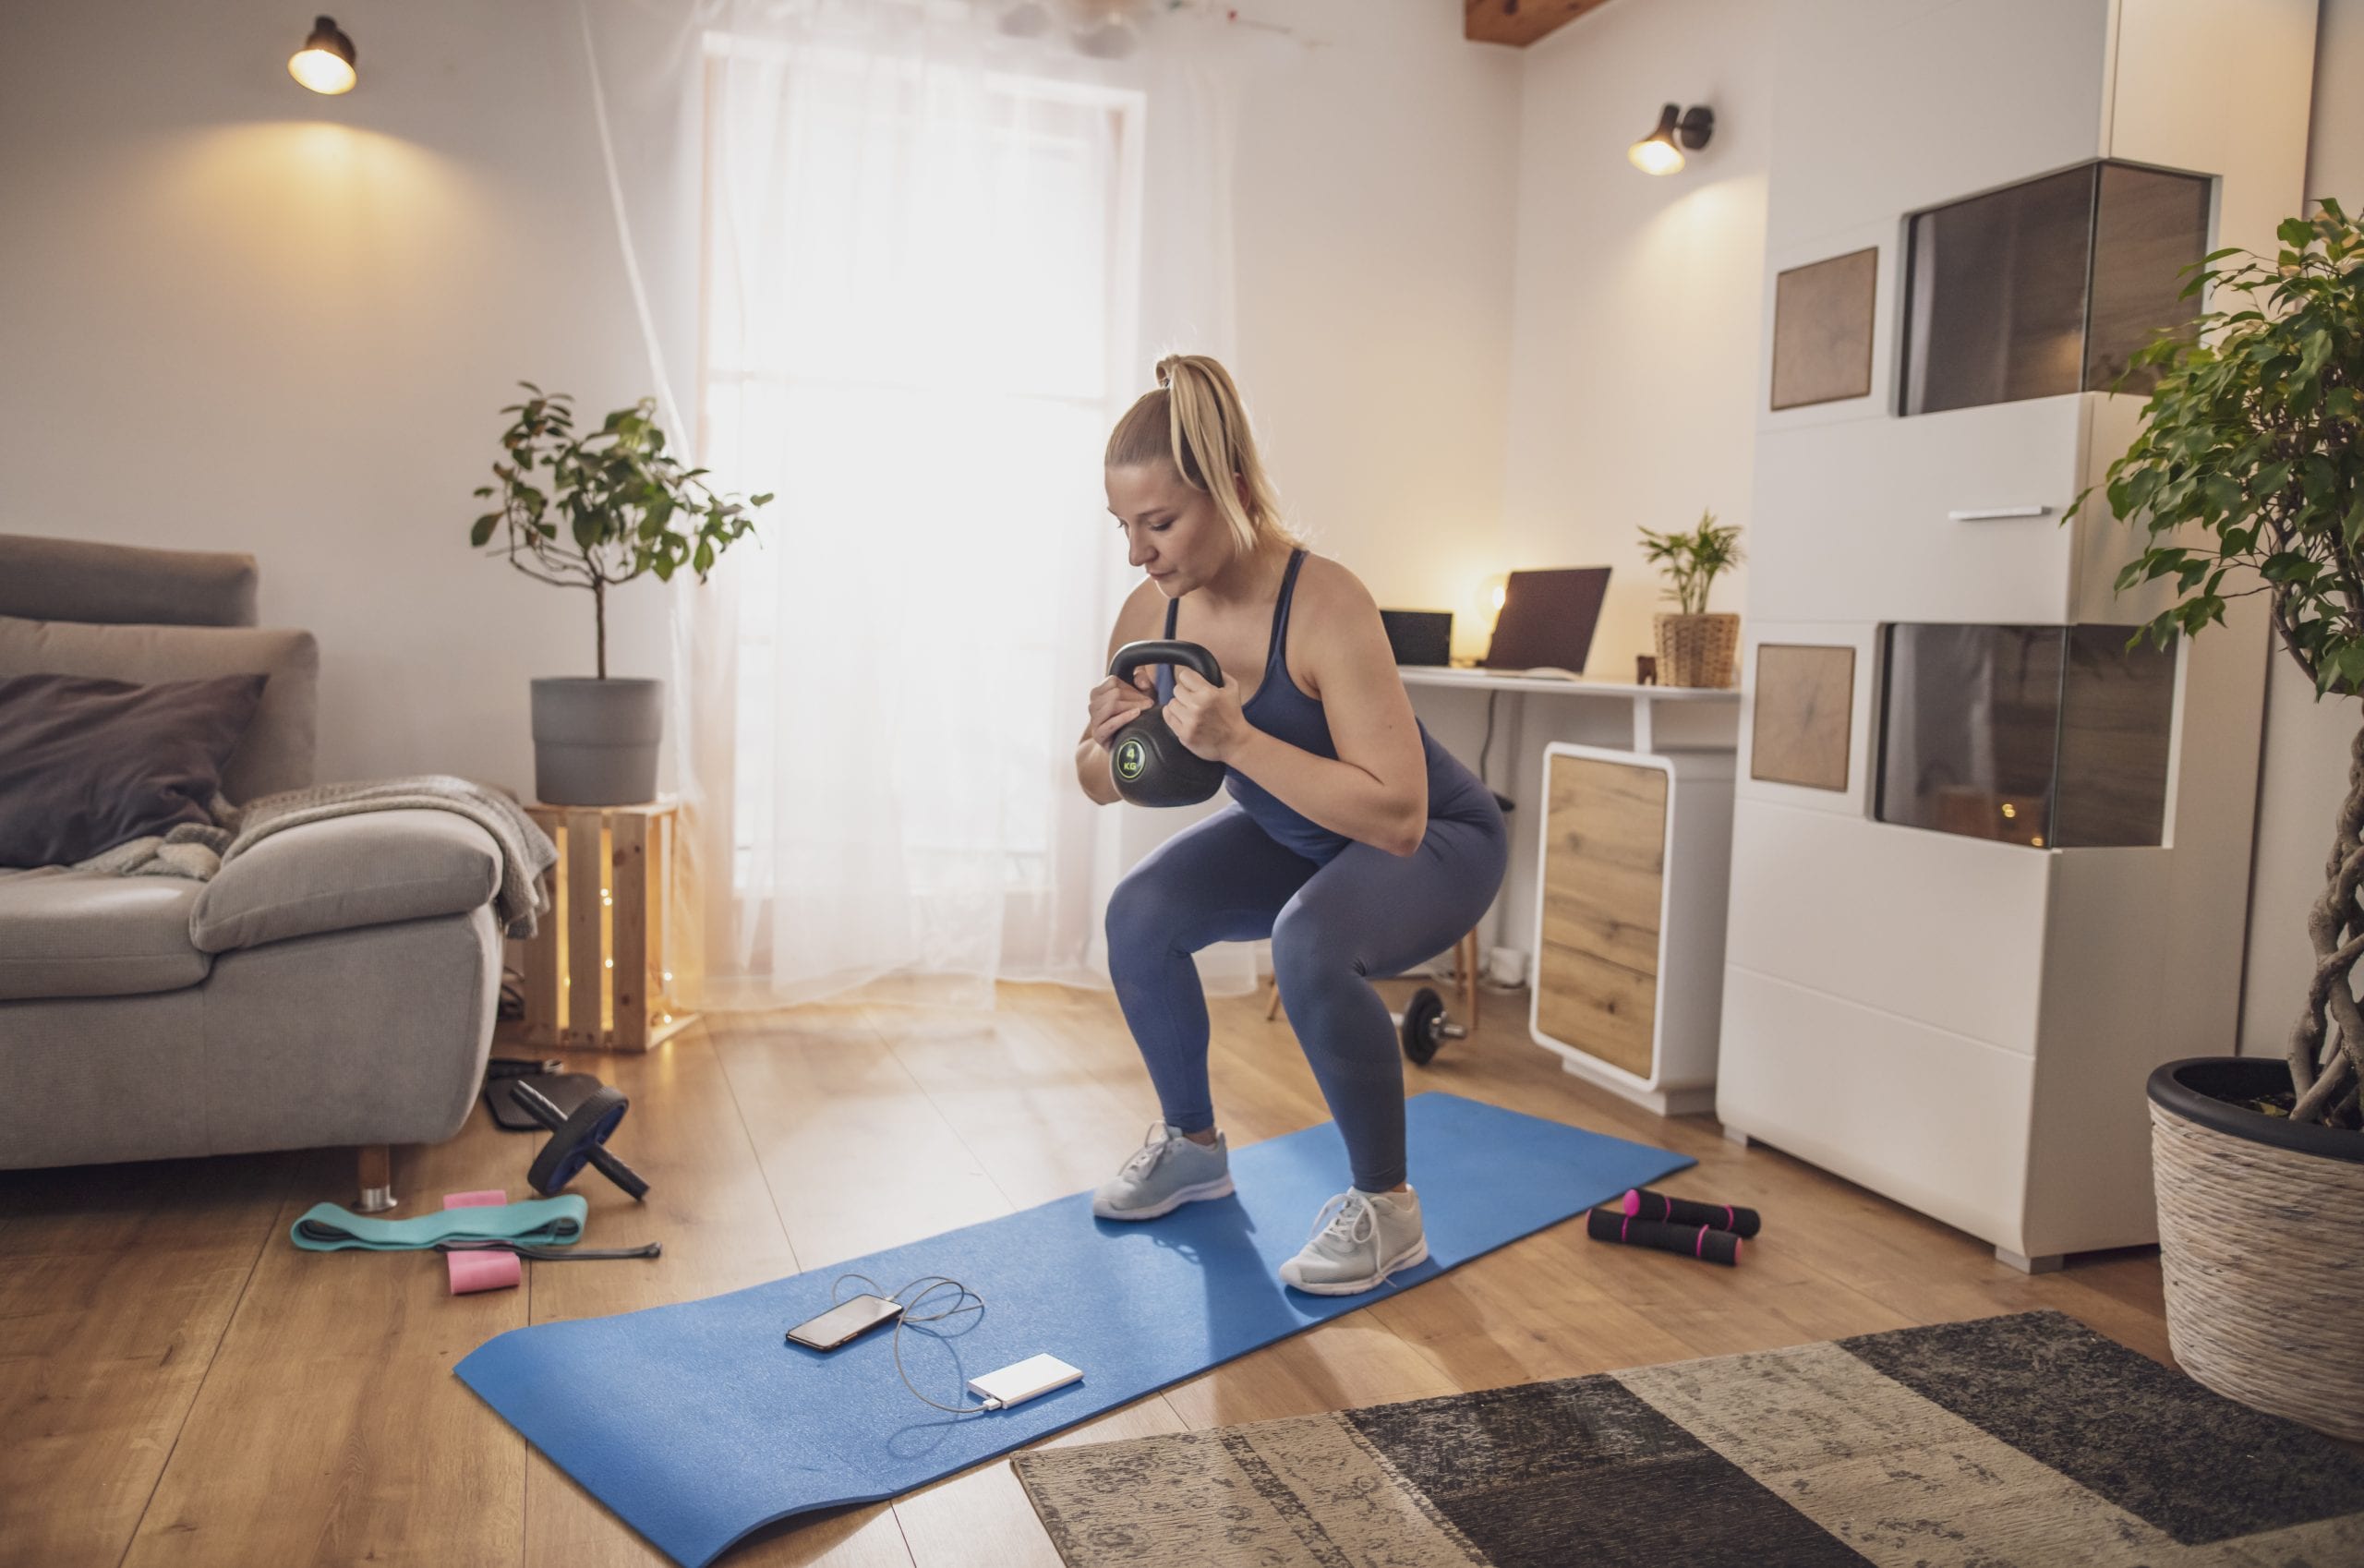 Young woman watching smart phone and squatting with kettlebell on yoga mat in living room